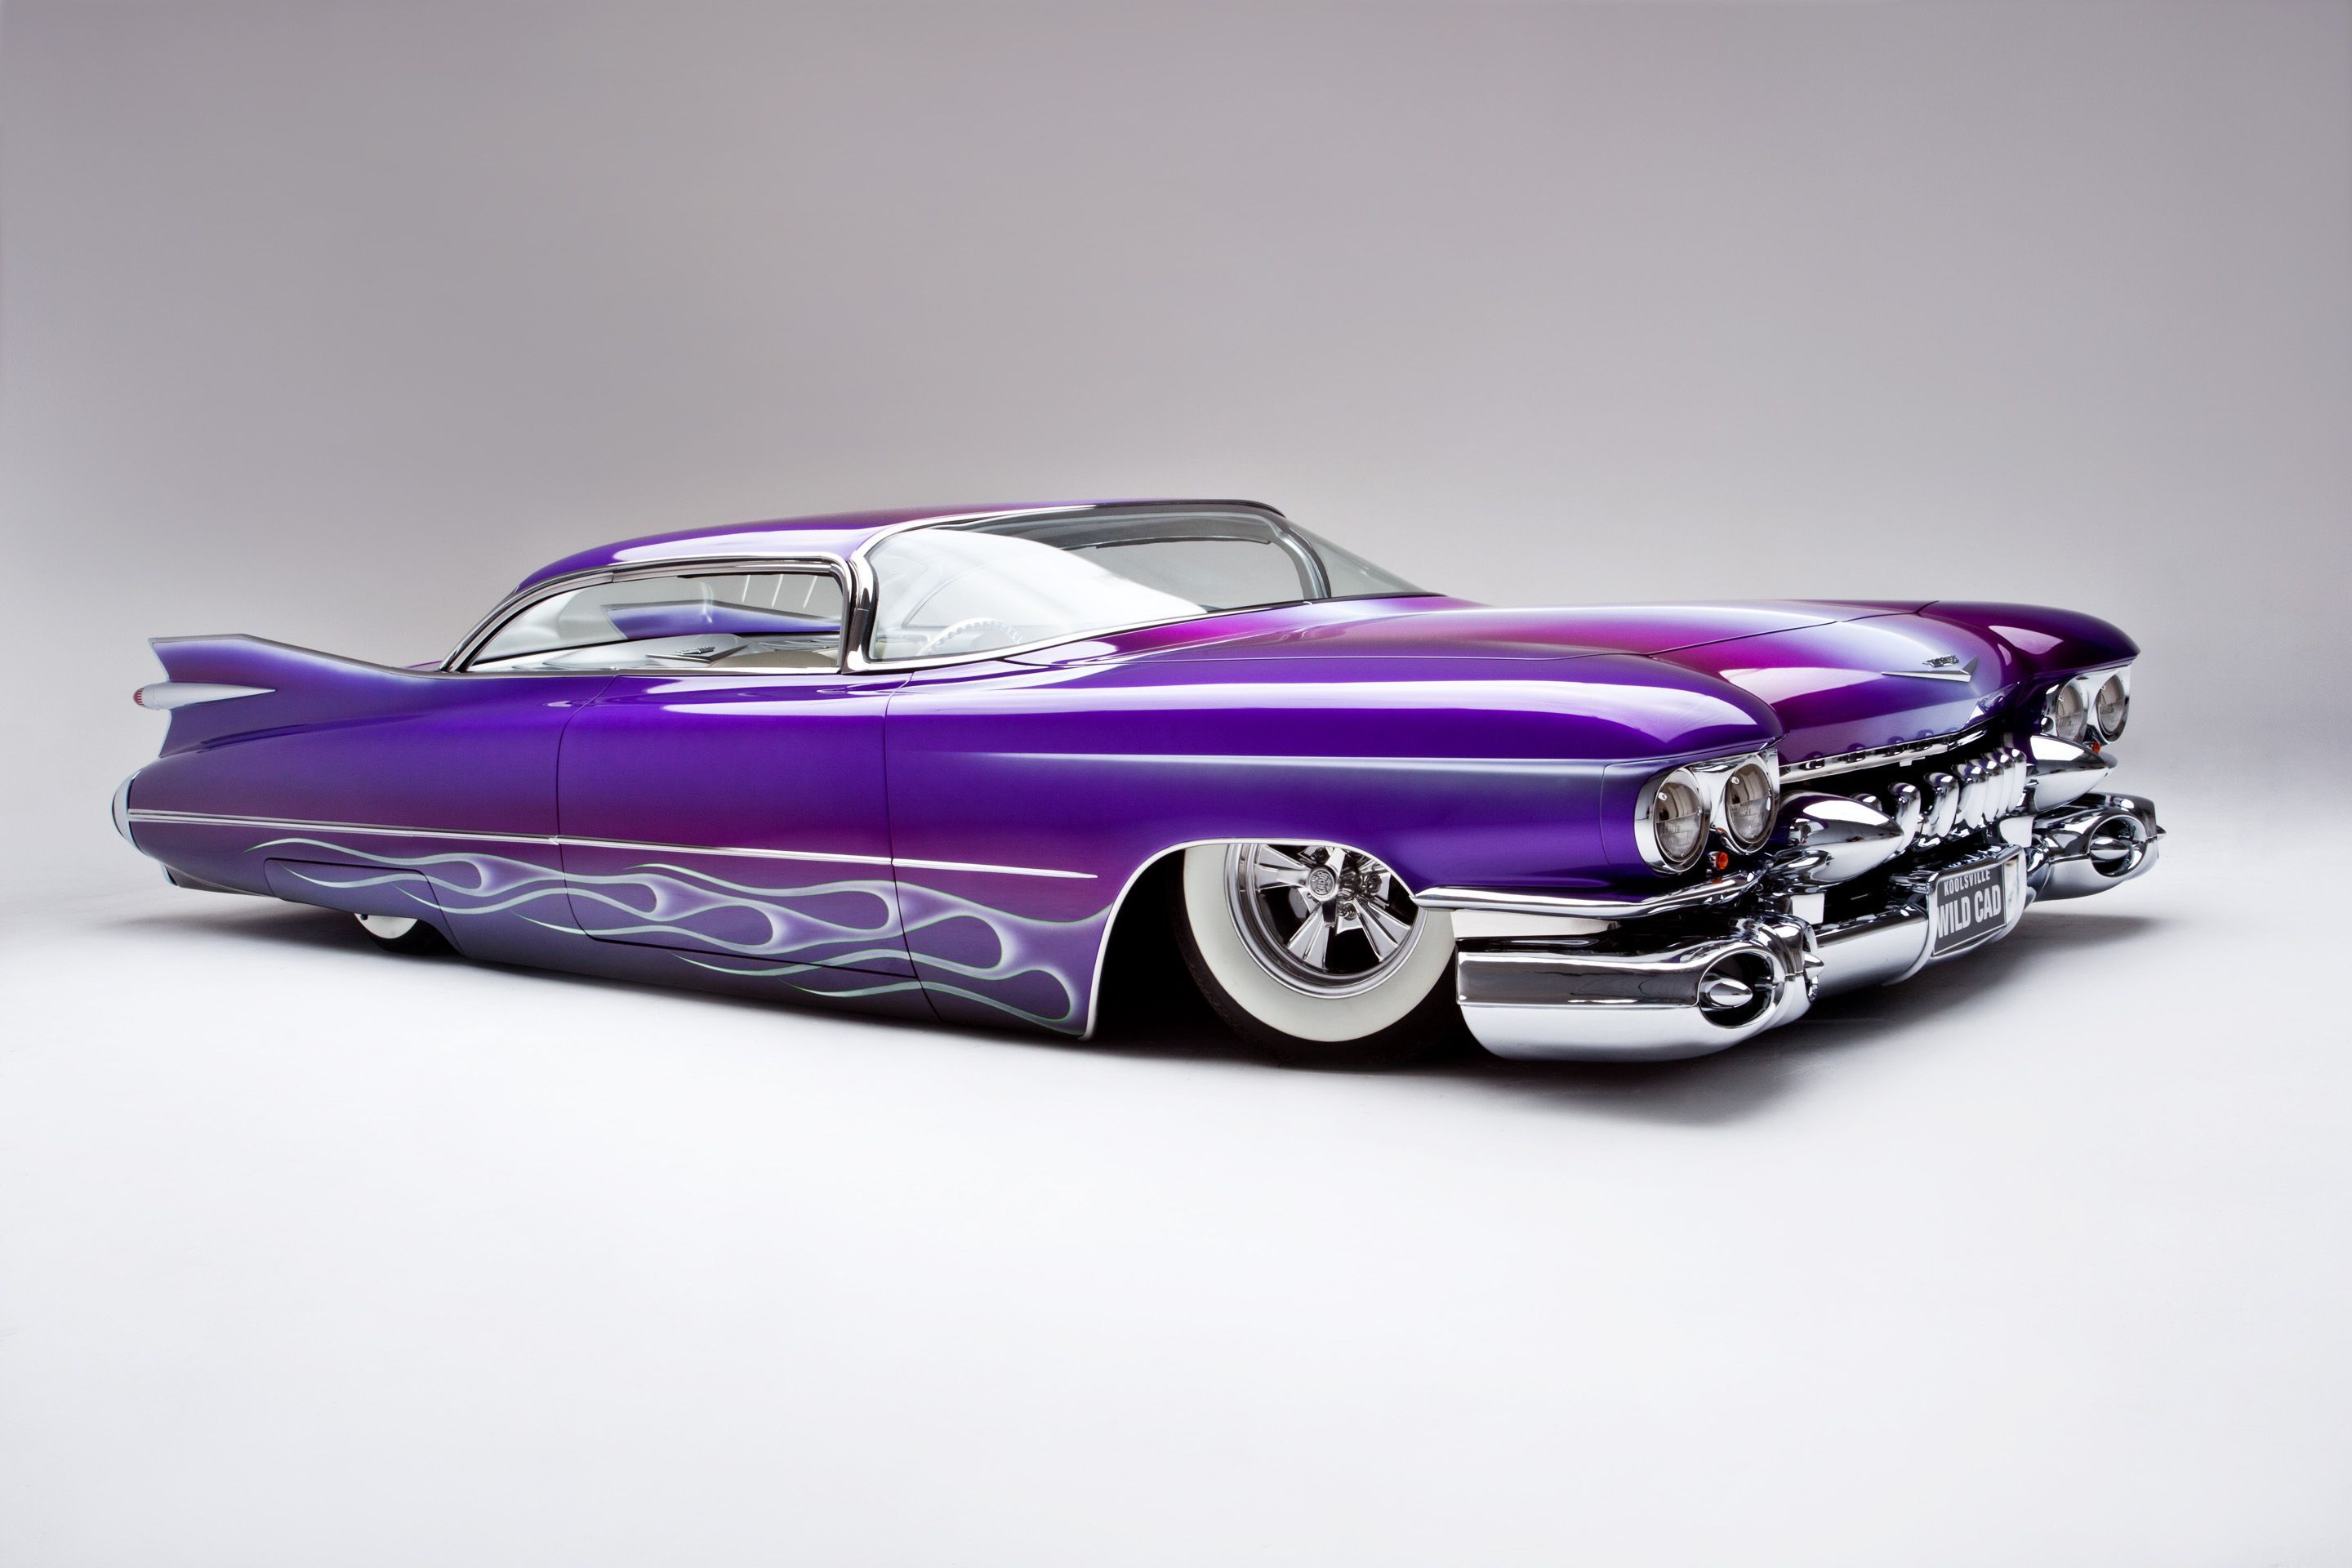 1959 Cadillac Coupe Deville ‘Wild Cad’ photoshoot